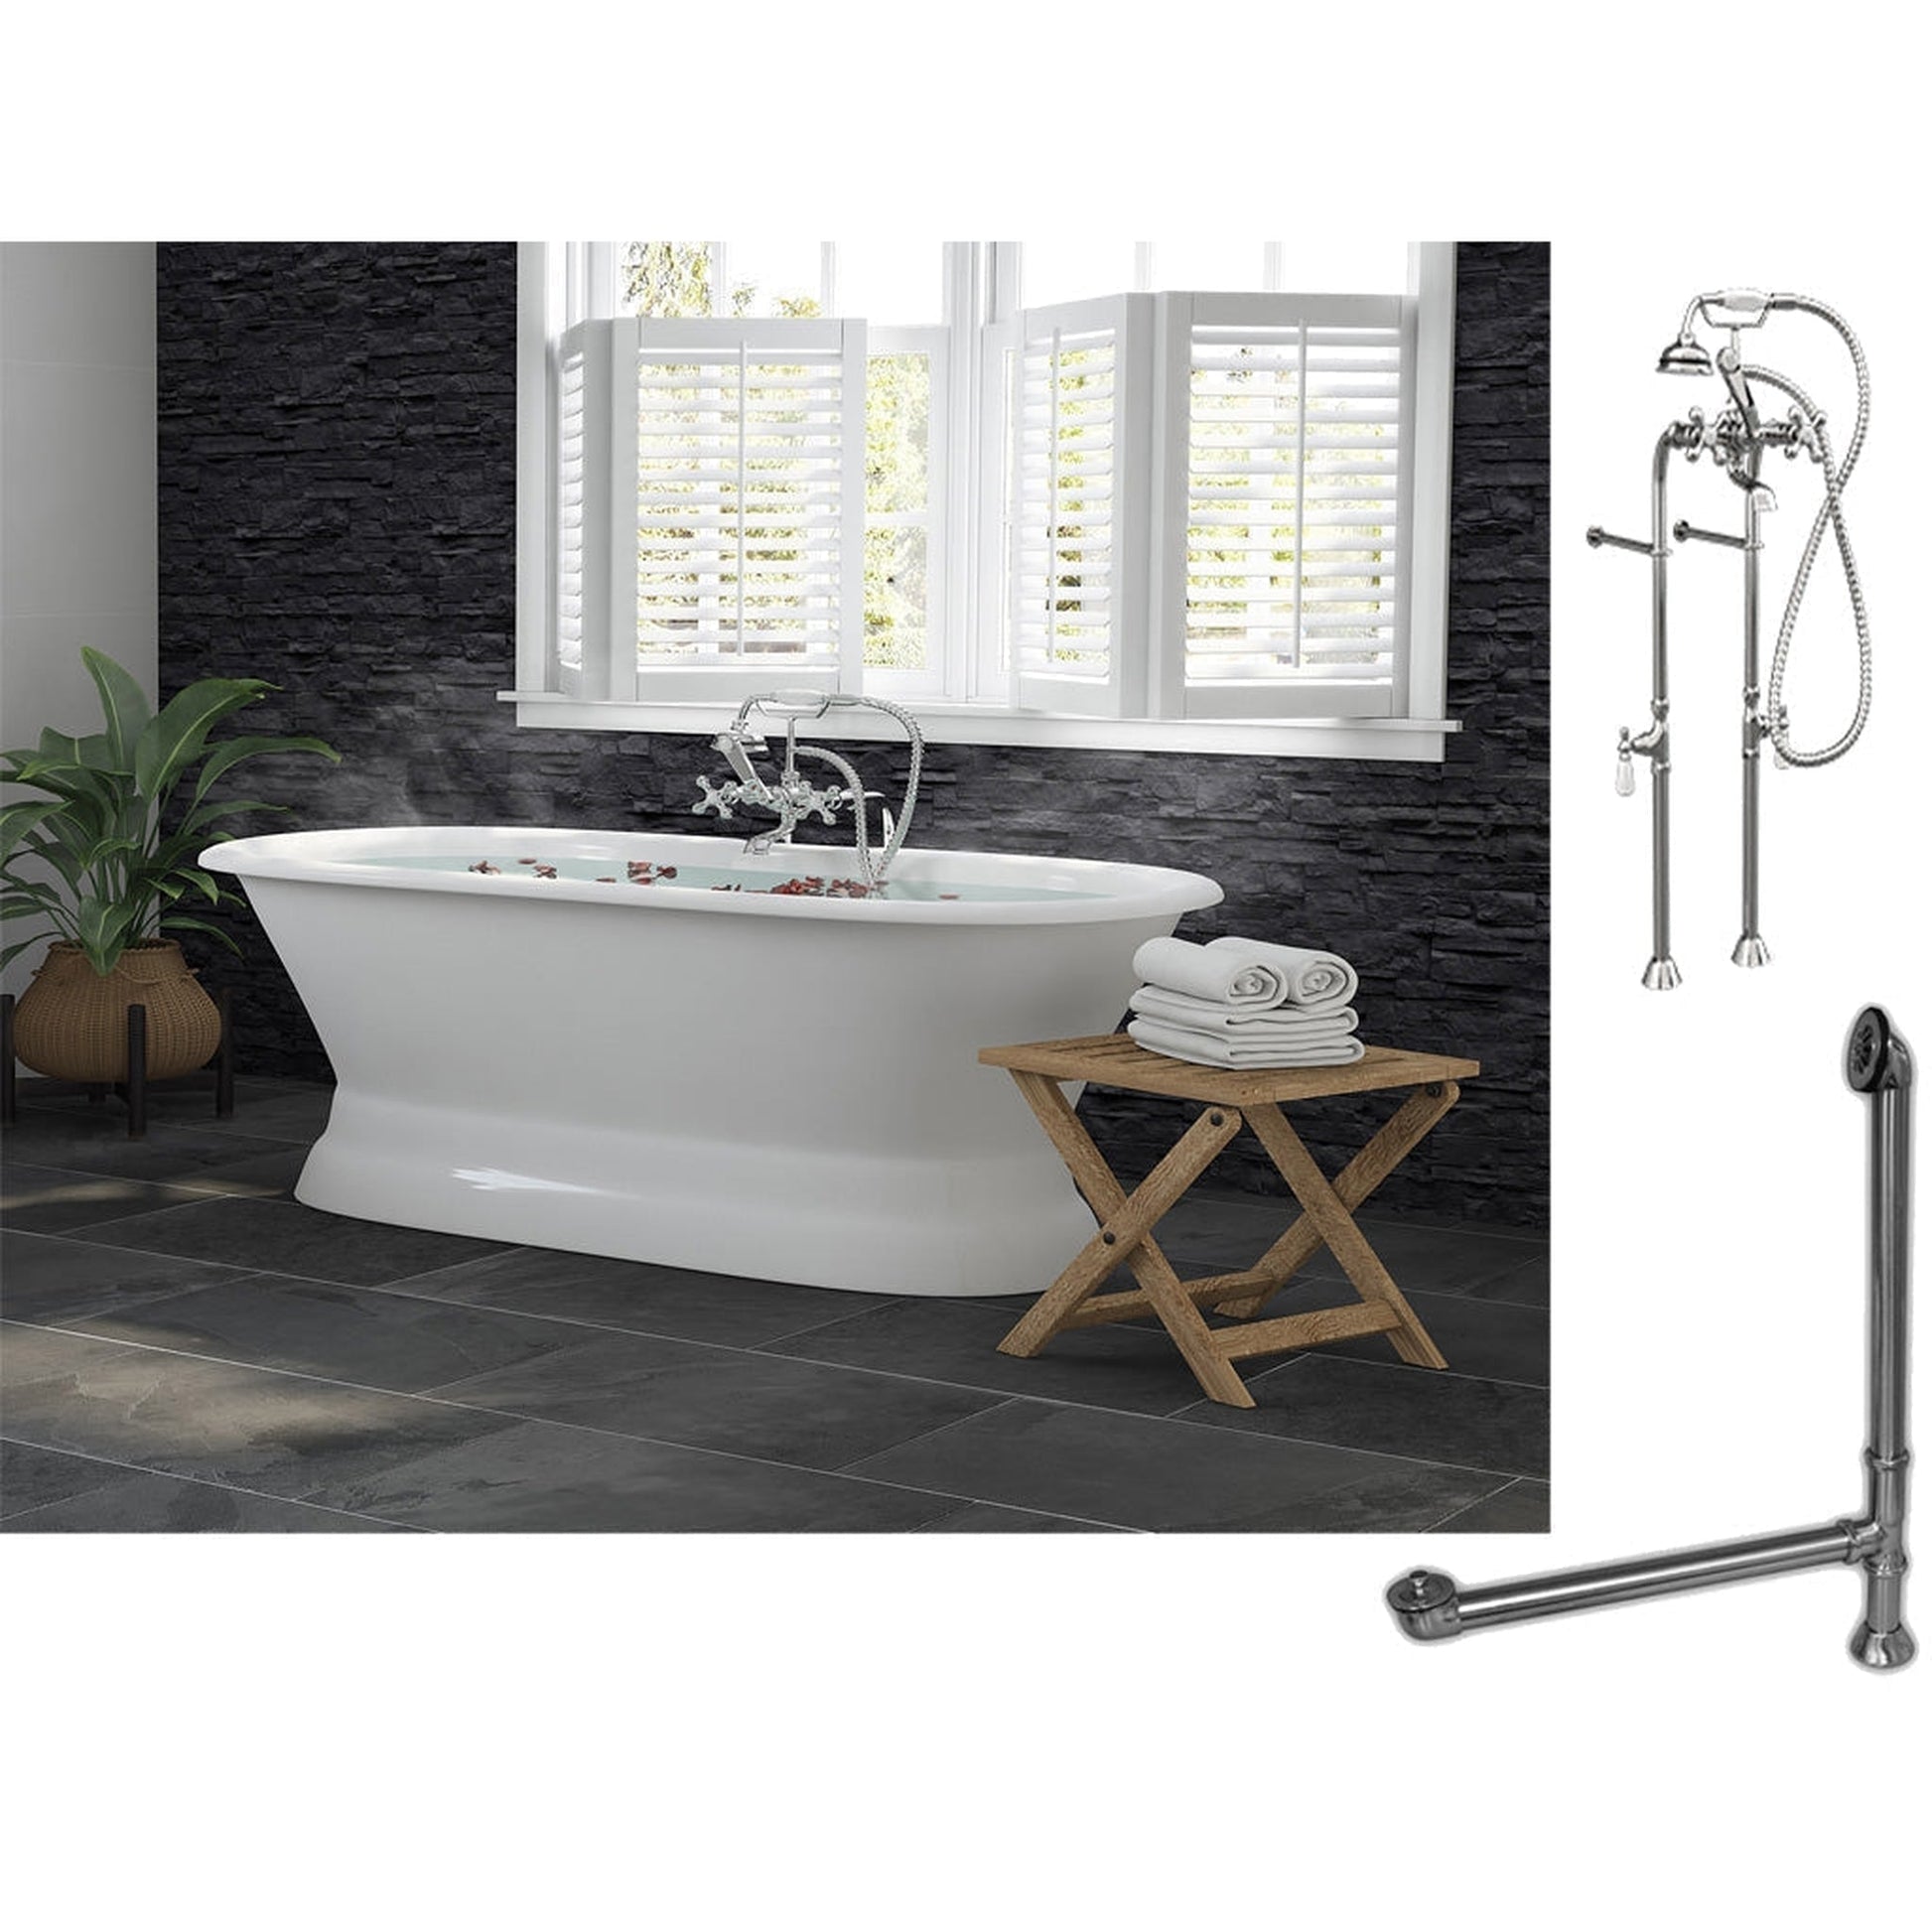 Cambridge Plumbing 66" White Cast Iron Double Ended Pedestal Bathtub With No Deck Holes And Complete Plumbing Package Including Floor Mounted British Telephone Faucet, Drain And Overflow Assembly In Polished Chrome